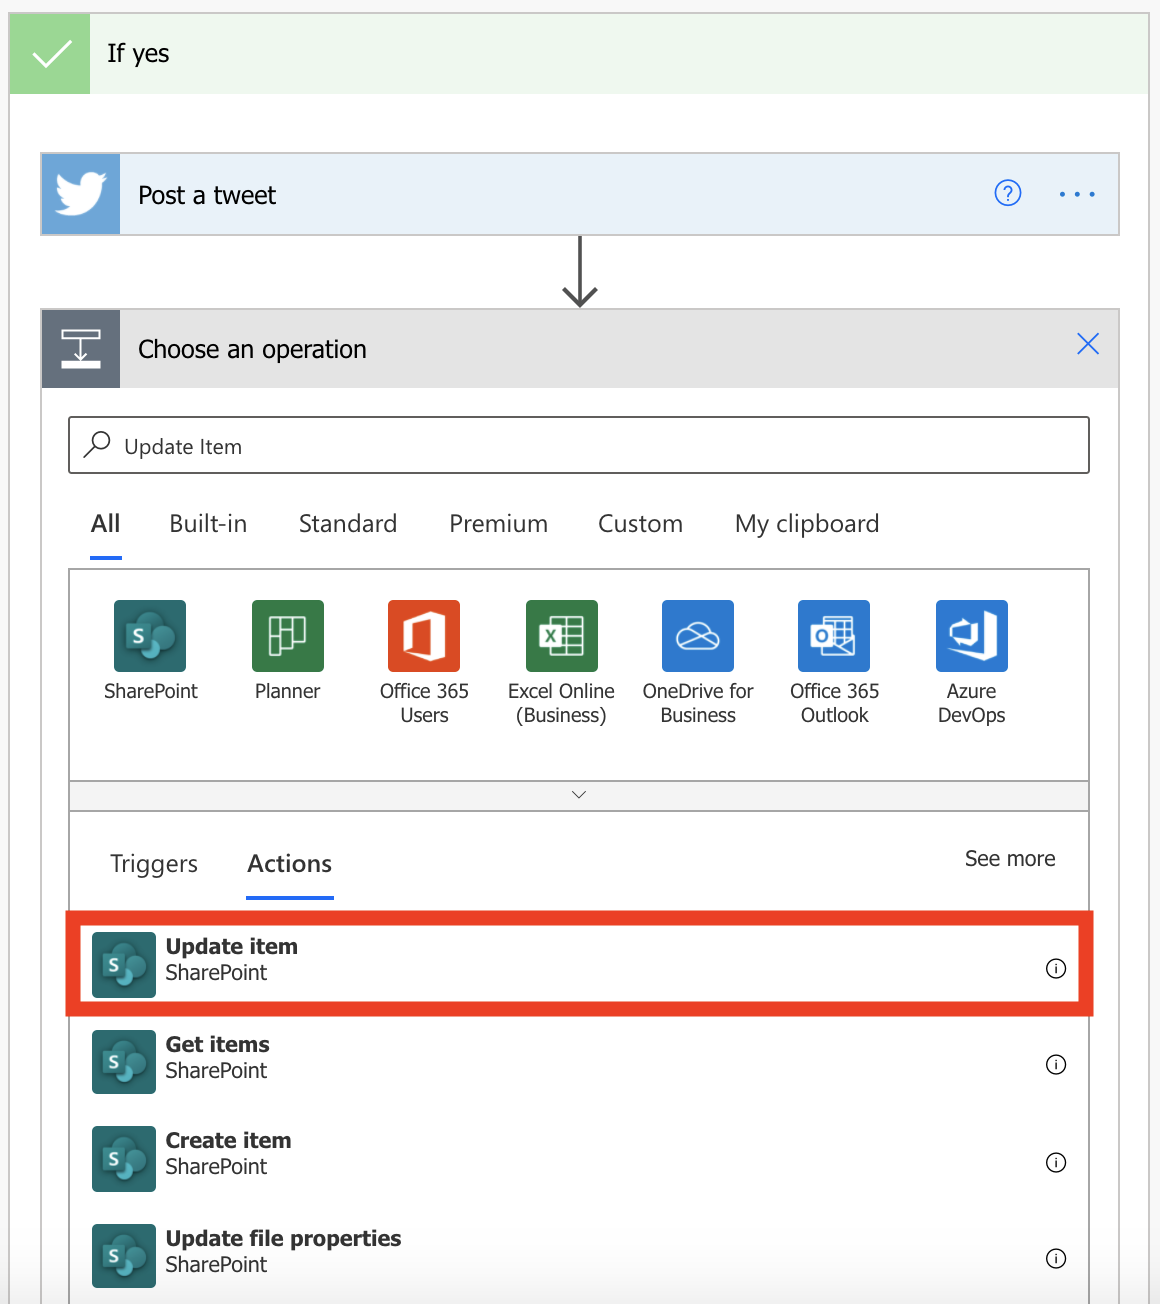 Screenshot of the If yes condition with the Post a tweet action and the Choose an action search results for SharePoint update item highlighted.